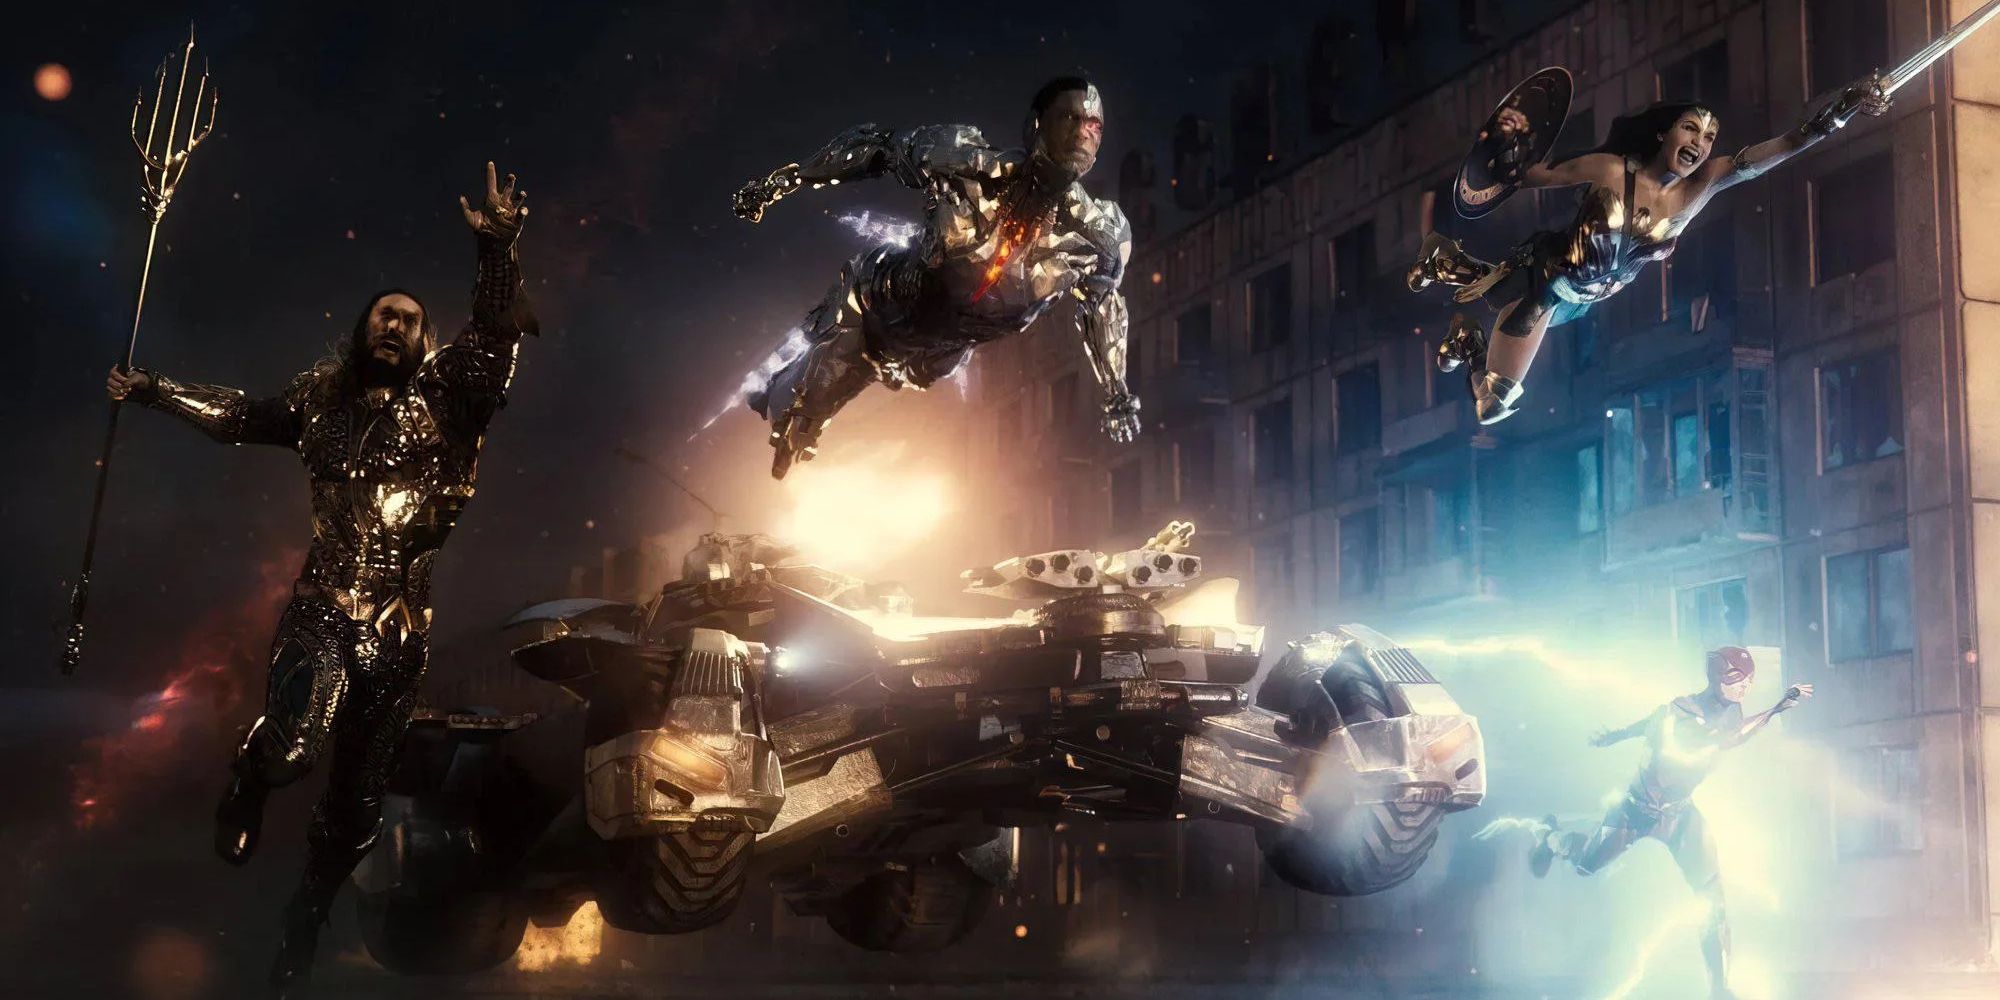 Zack Snyder's Justice League featured the entire team working as one in the film's final battle